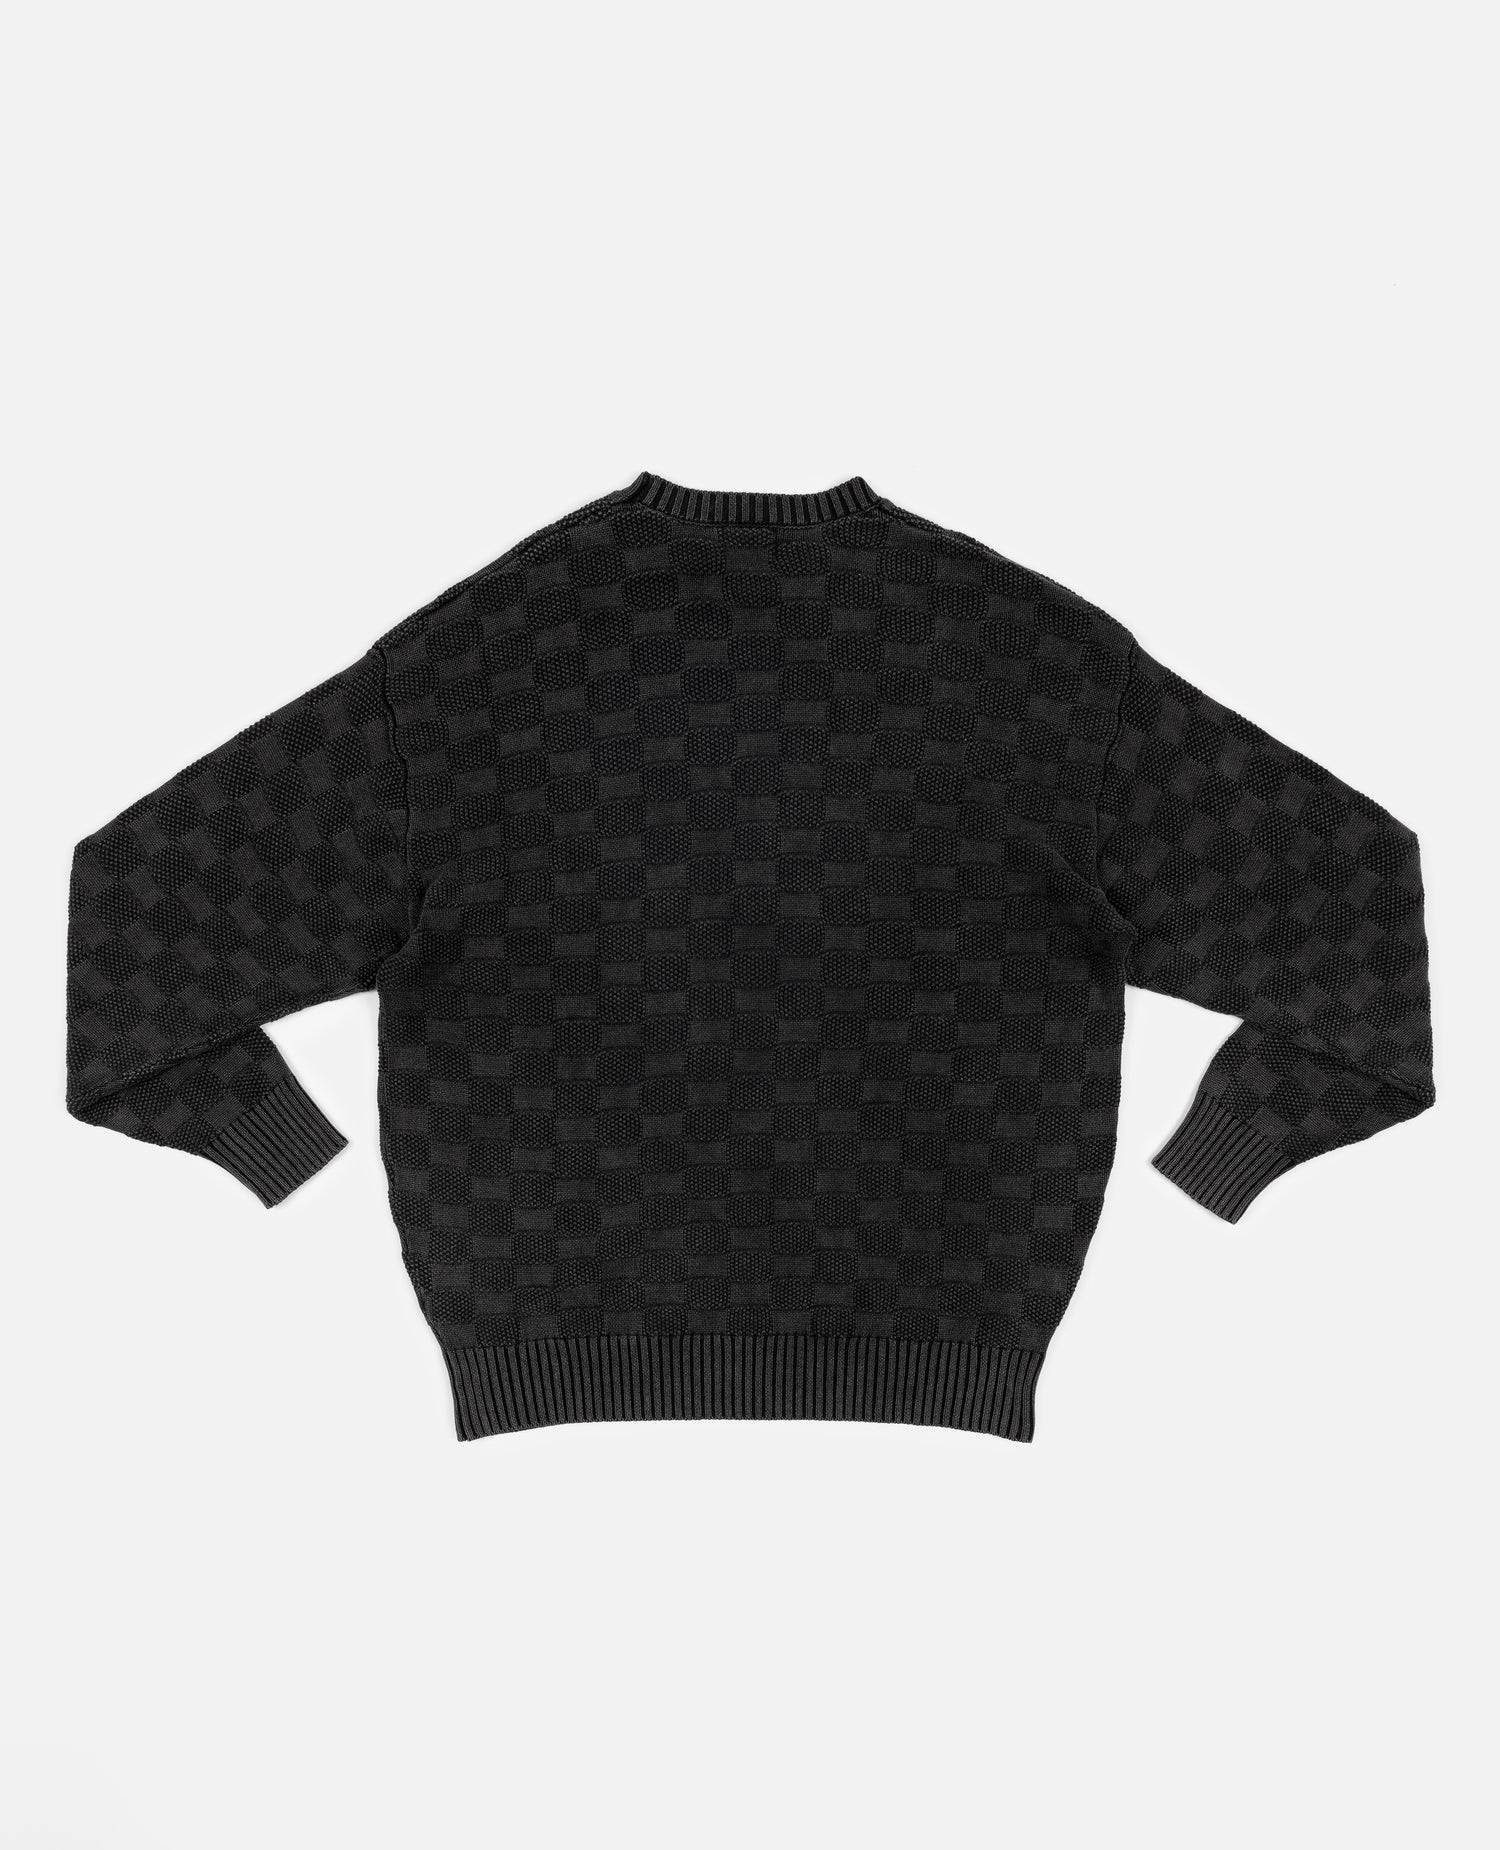 Patta Purl Ribbed Knitted Sweater (Pirate Black)